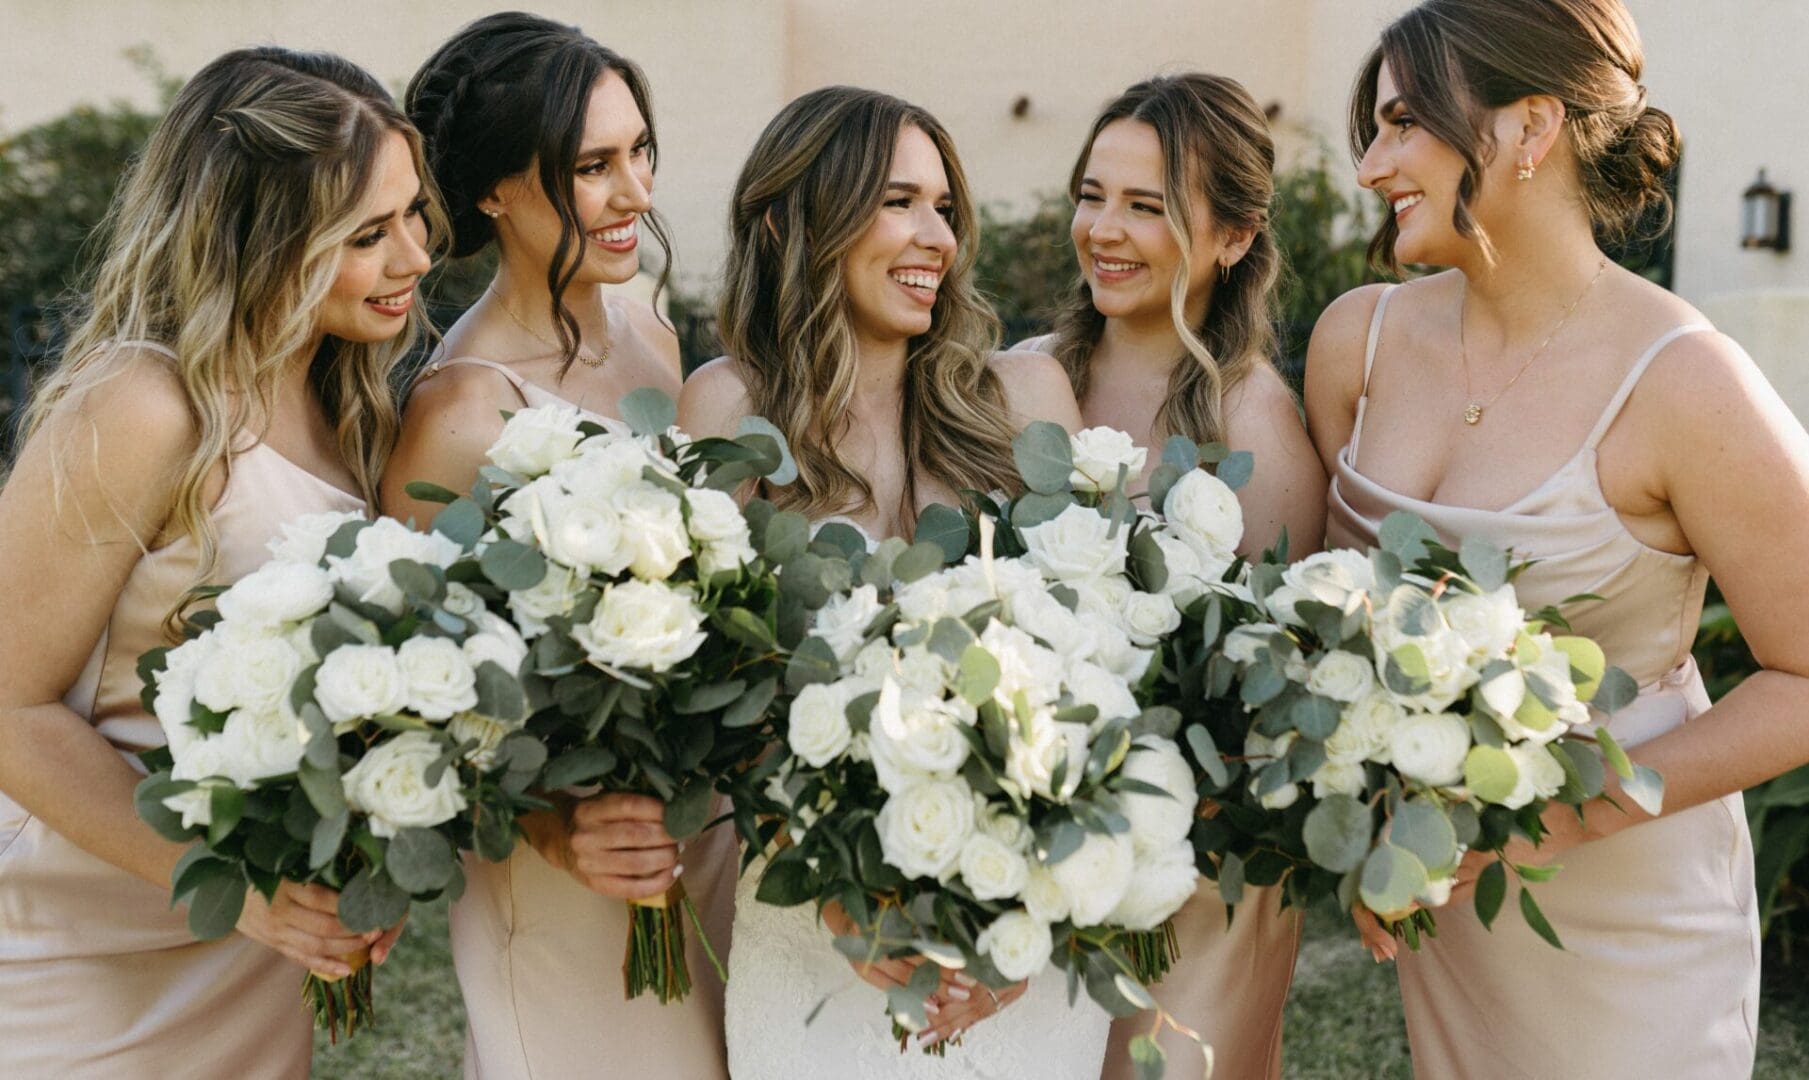 Five women in pastel dresses holding white bouquets and smiling at a wedding event.